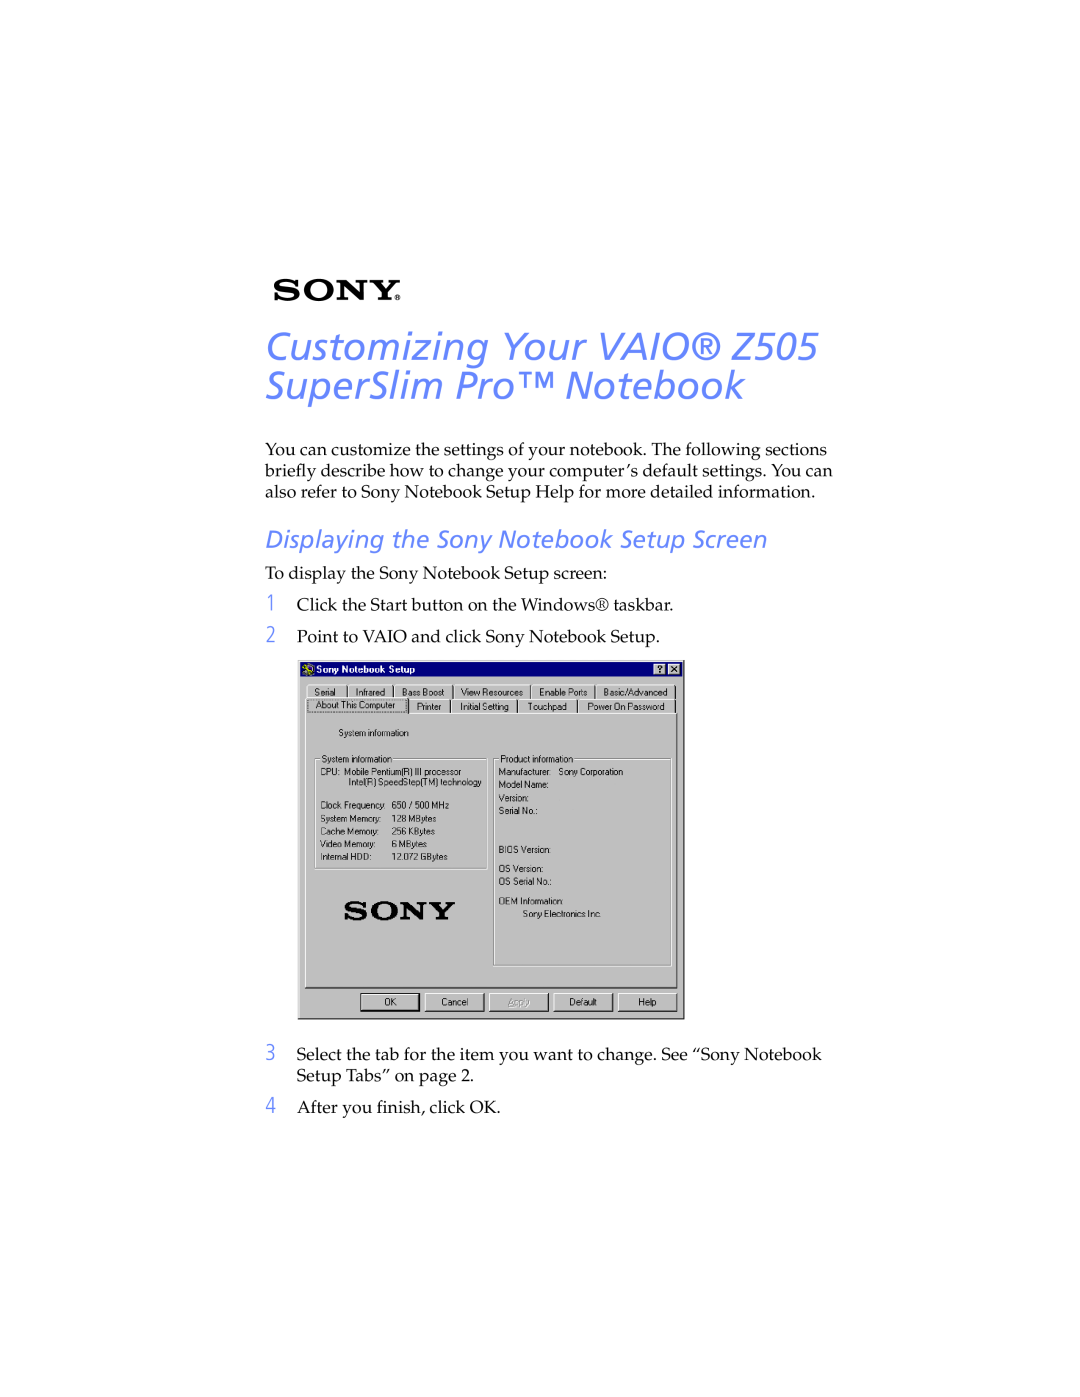 Sony manual Displaying the Sony Notebook Setup Screen, Customizing Your VAIO Z505 SuperSlim Pro Notebook 